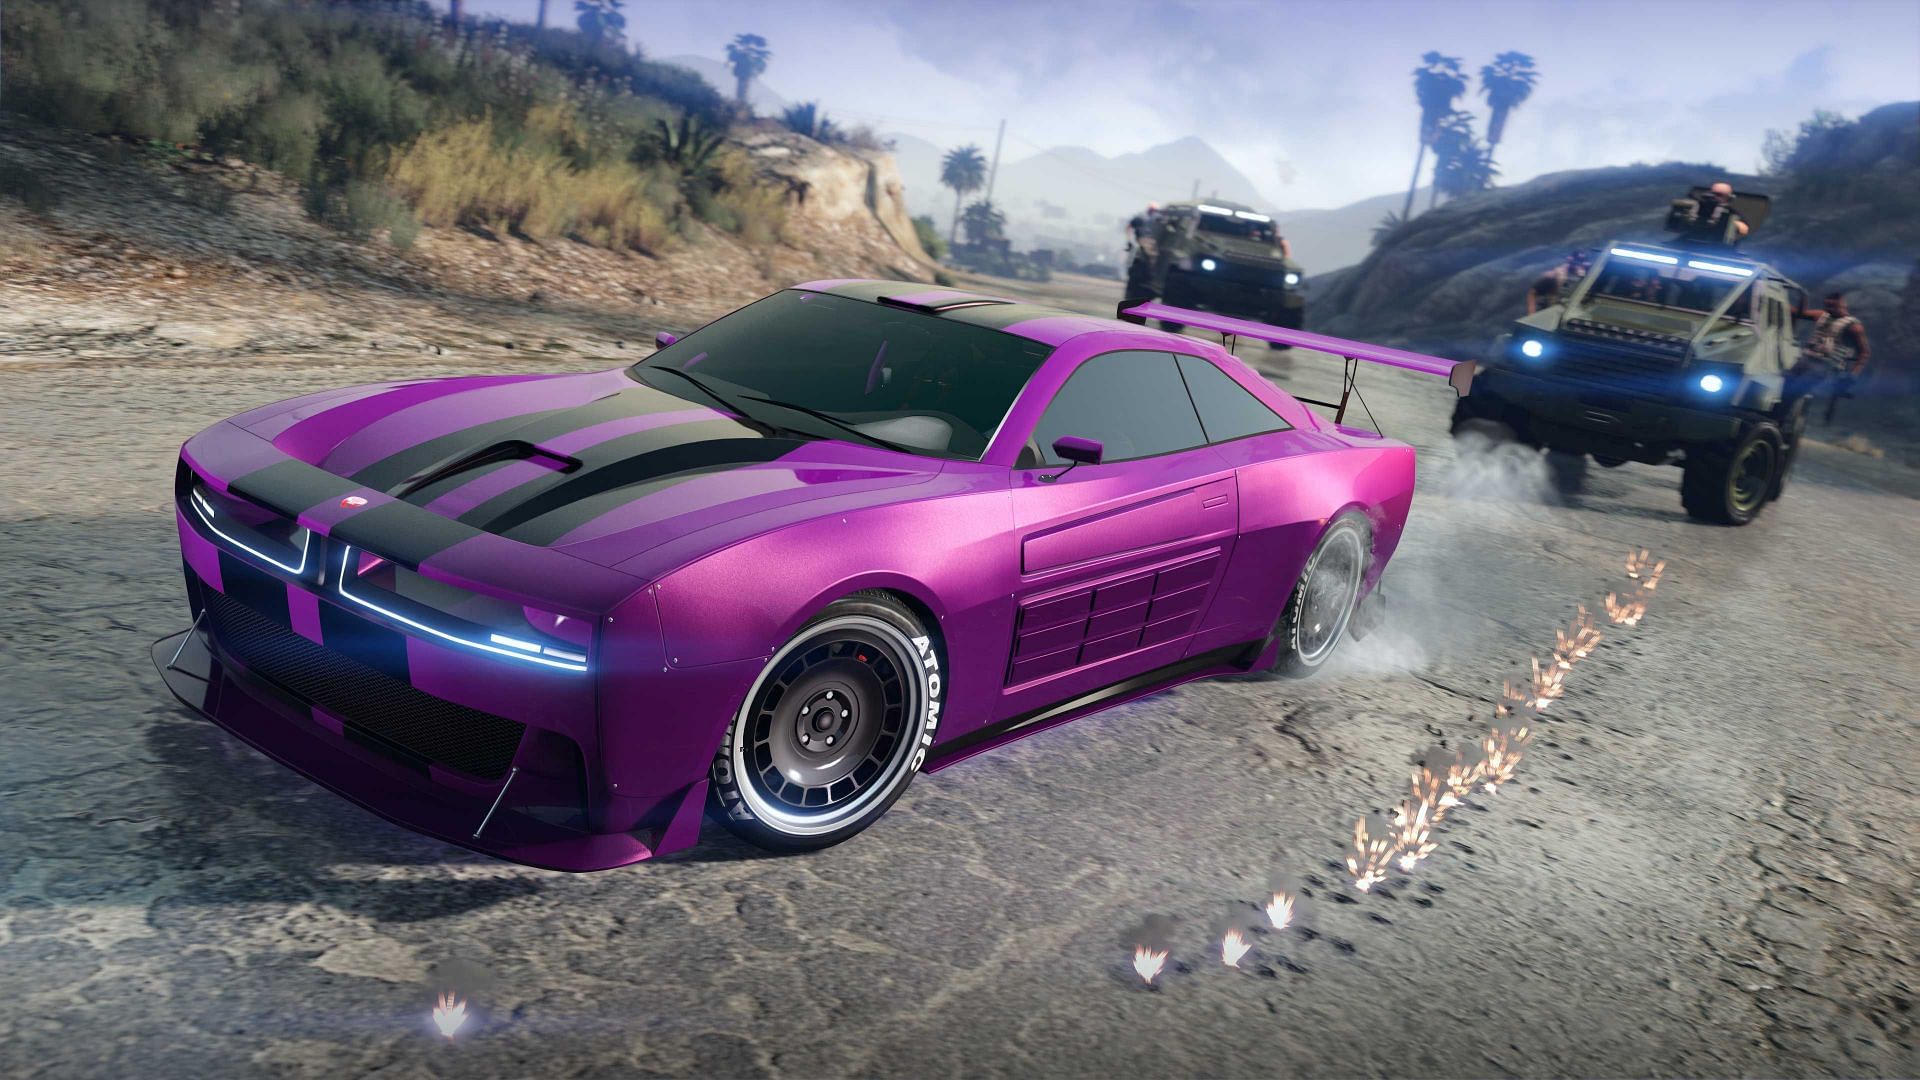 Another promotional image for this car (Image via Rockstar Games)